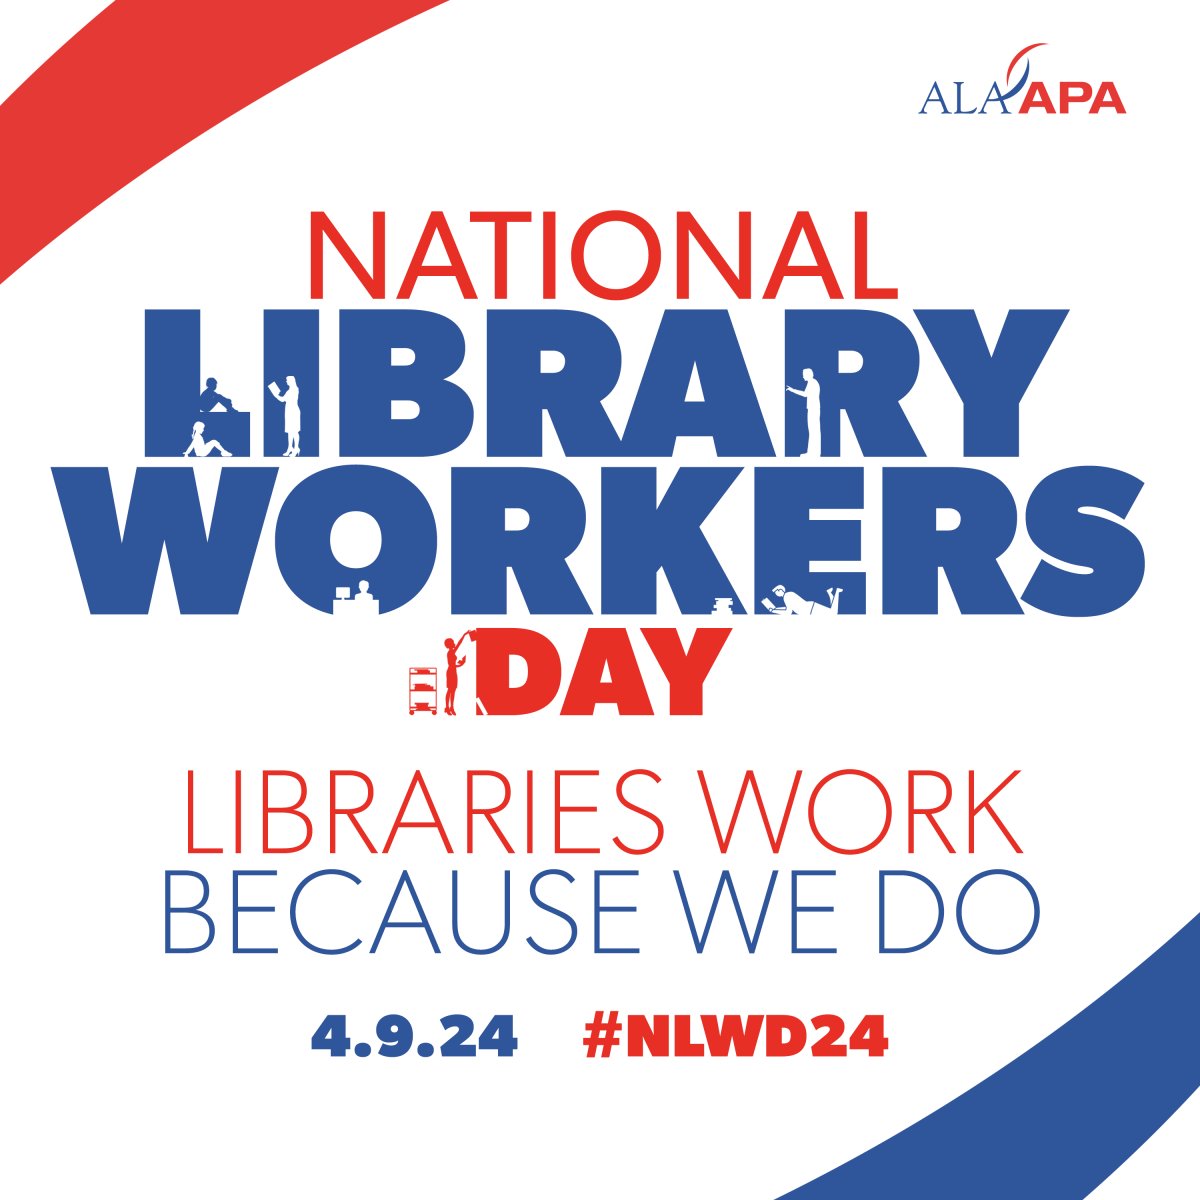 #NLWD24 Celebrate Library workers today!!!